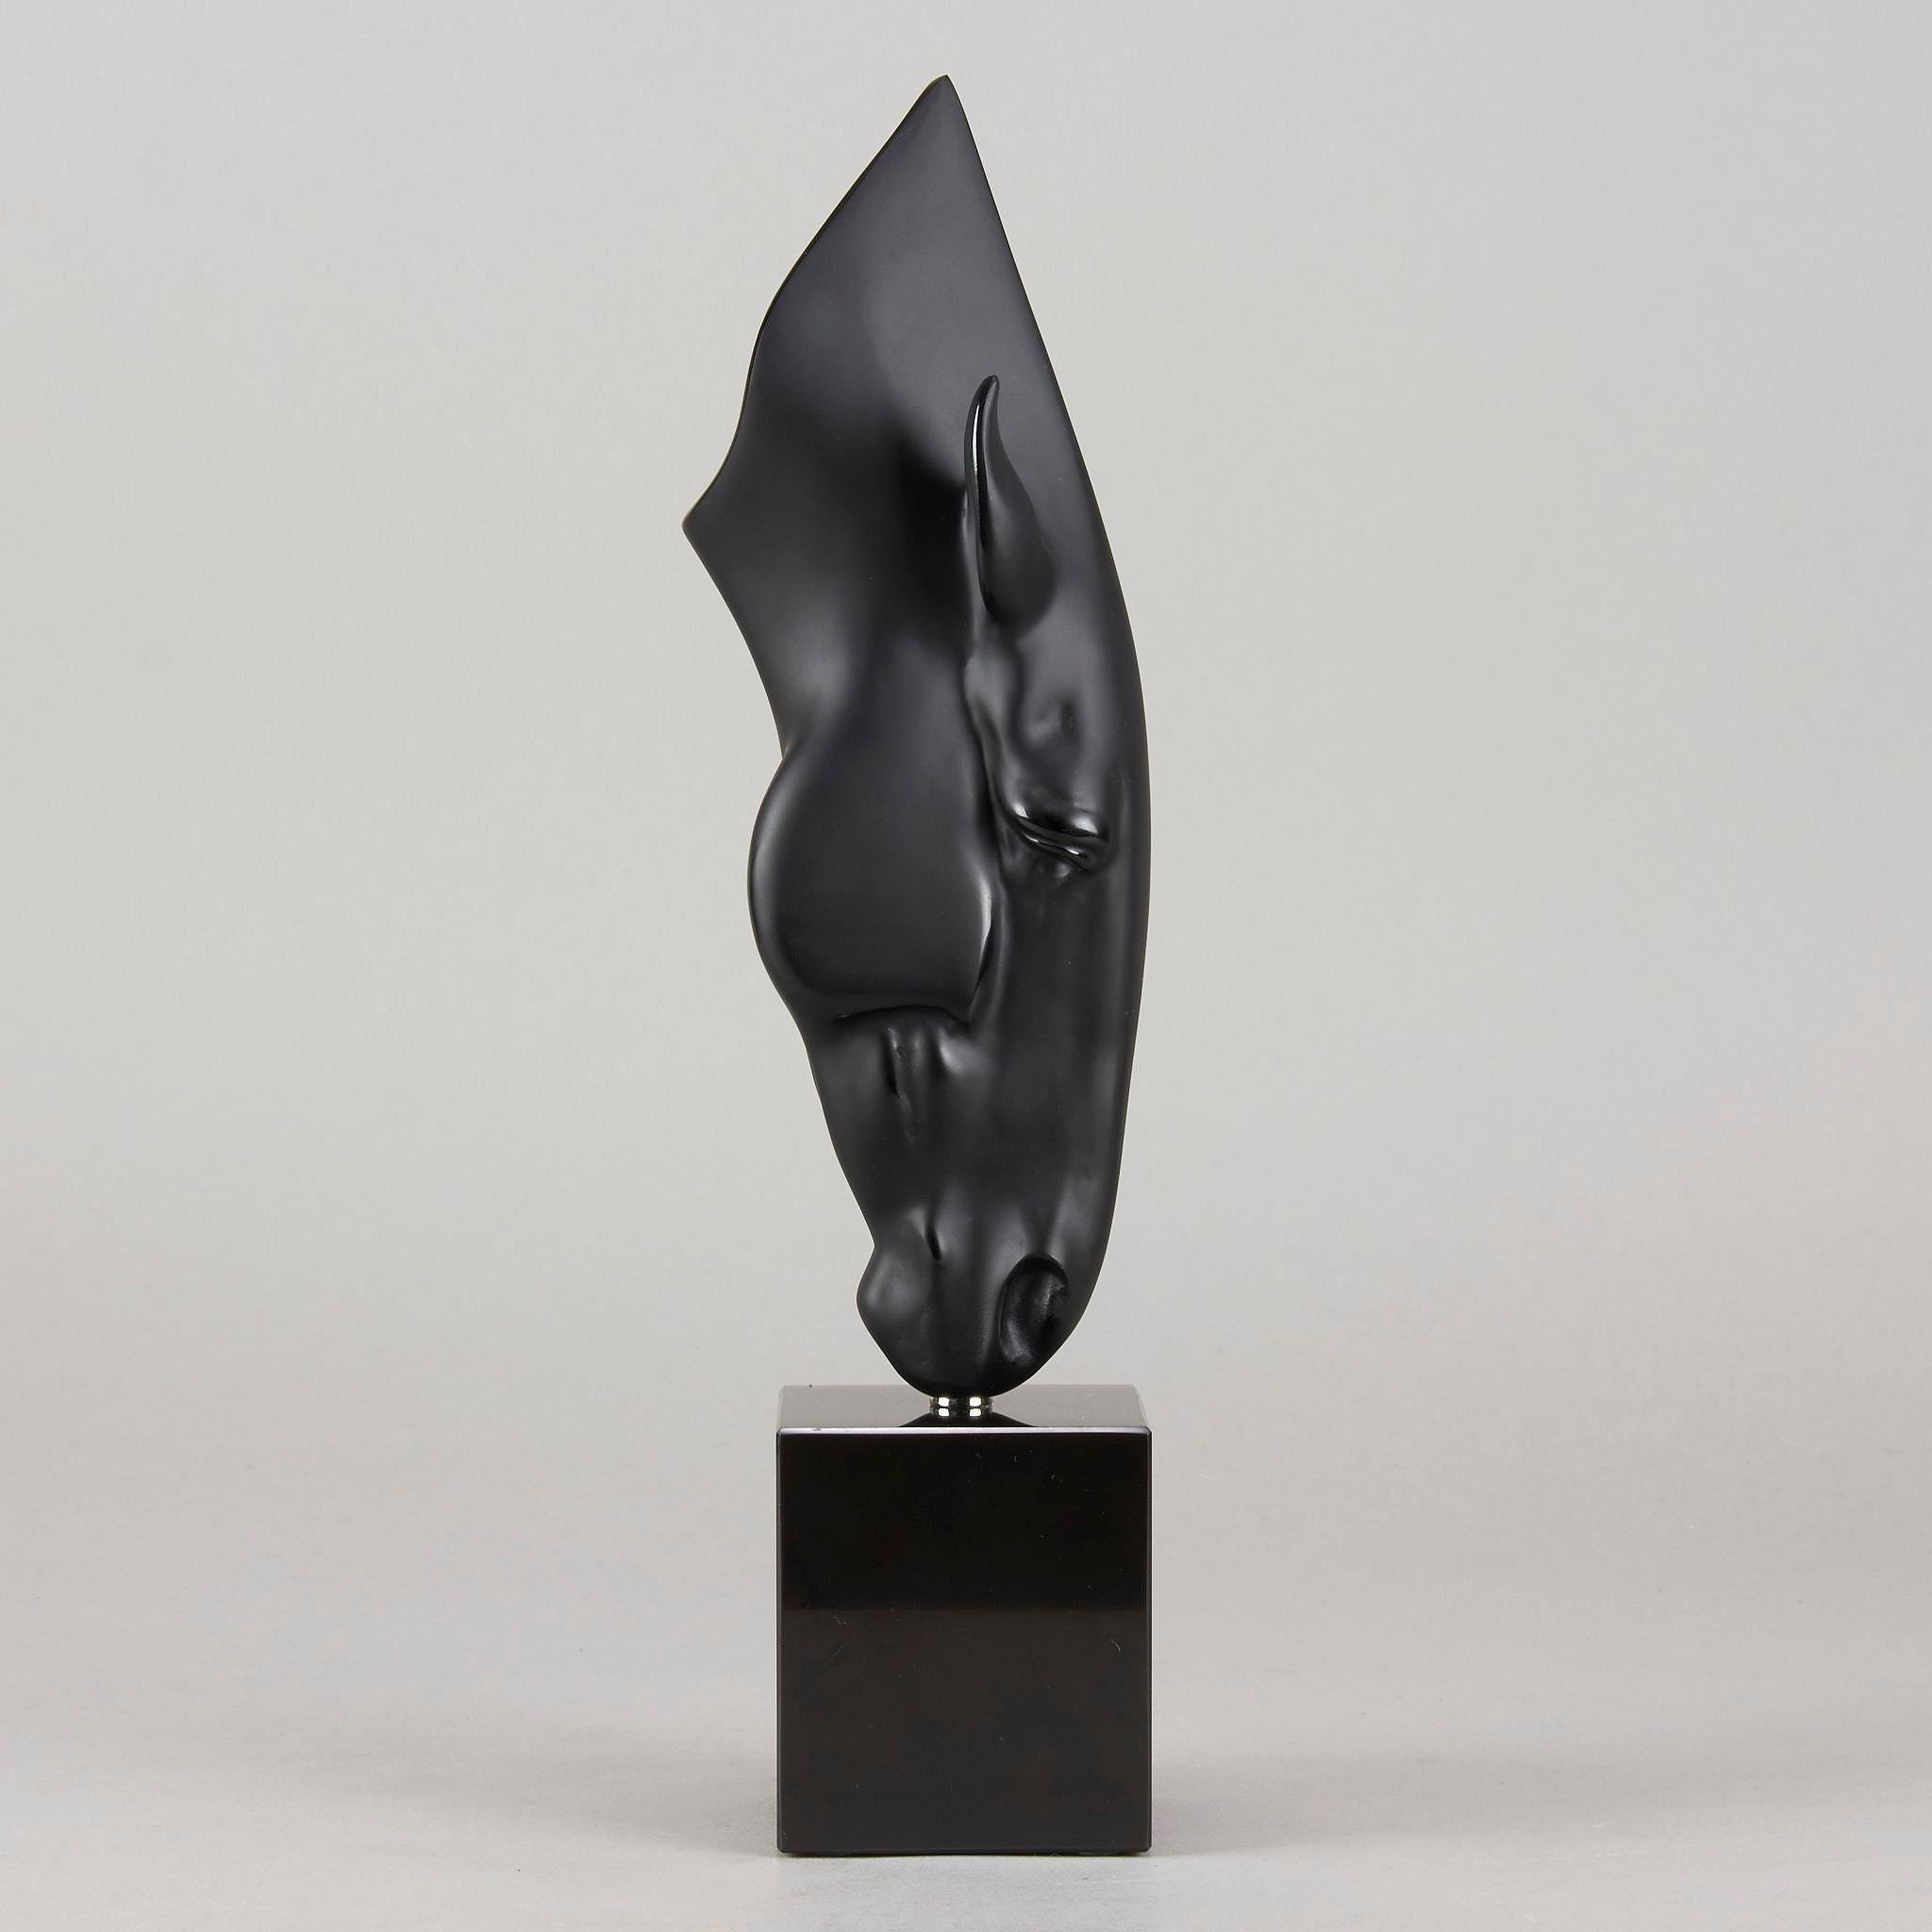 Contemporary Lalique Crystal Glass Sculpture Entitled 